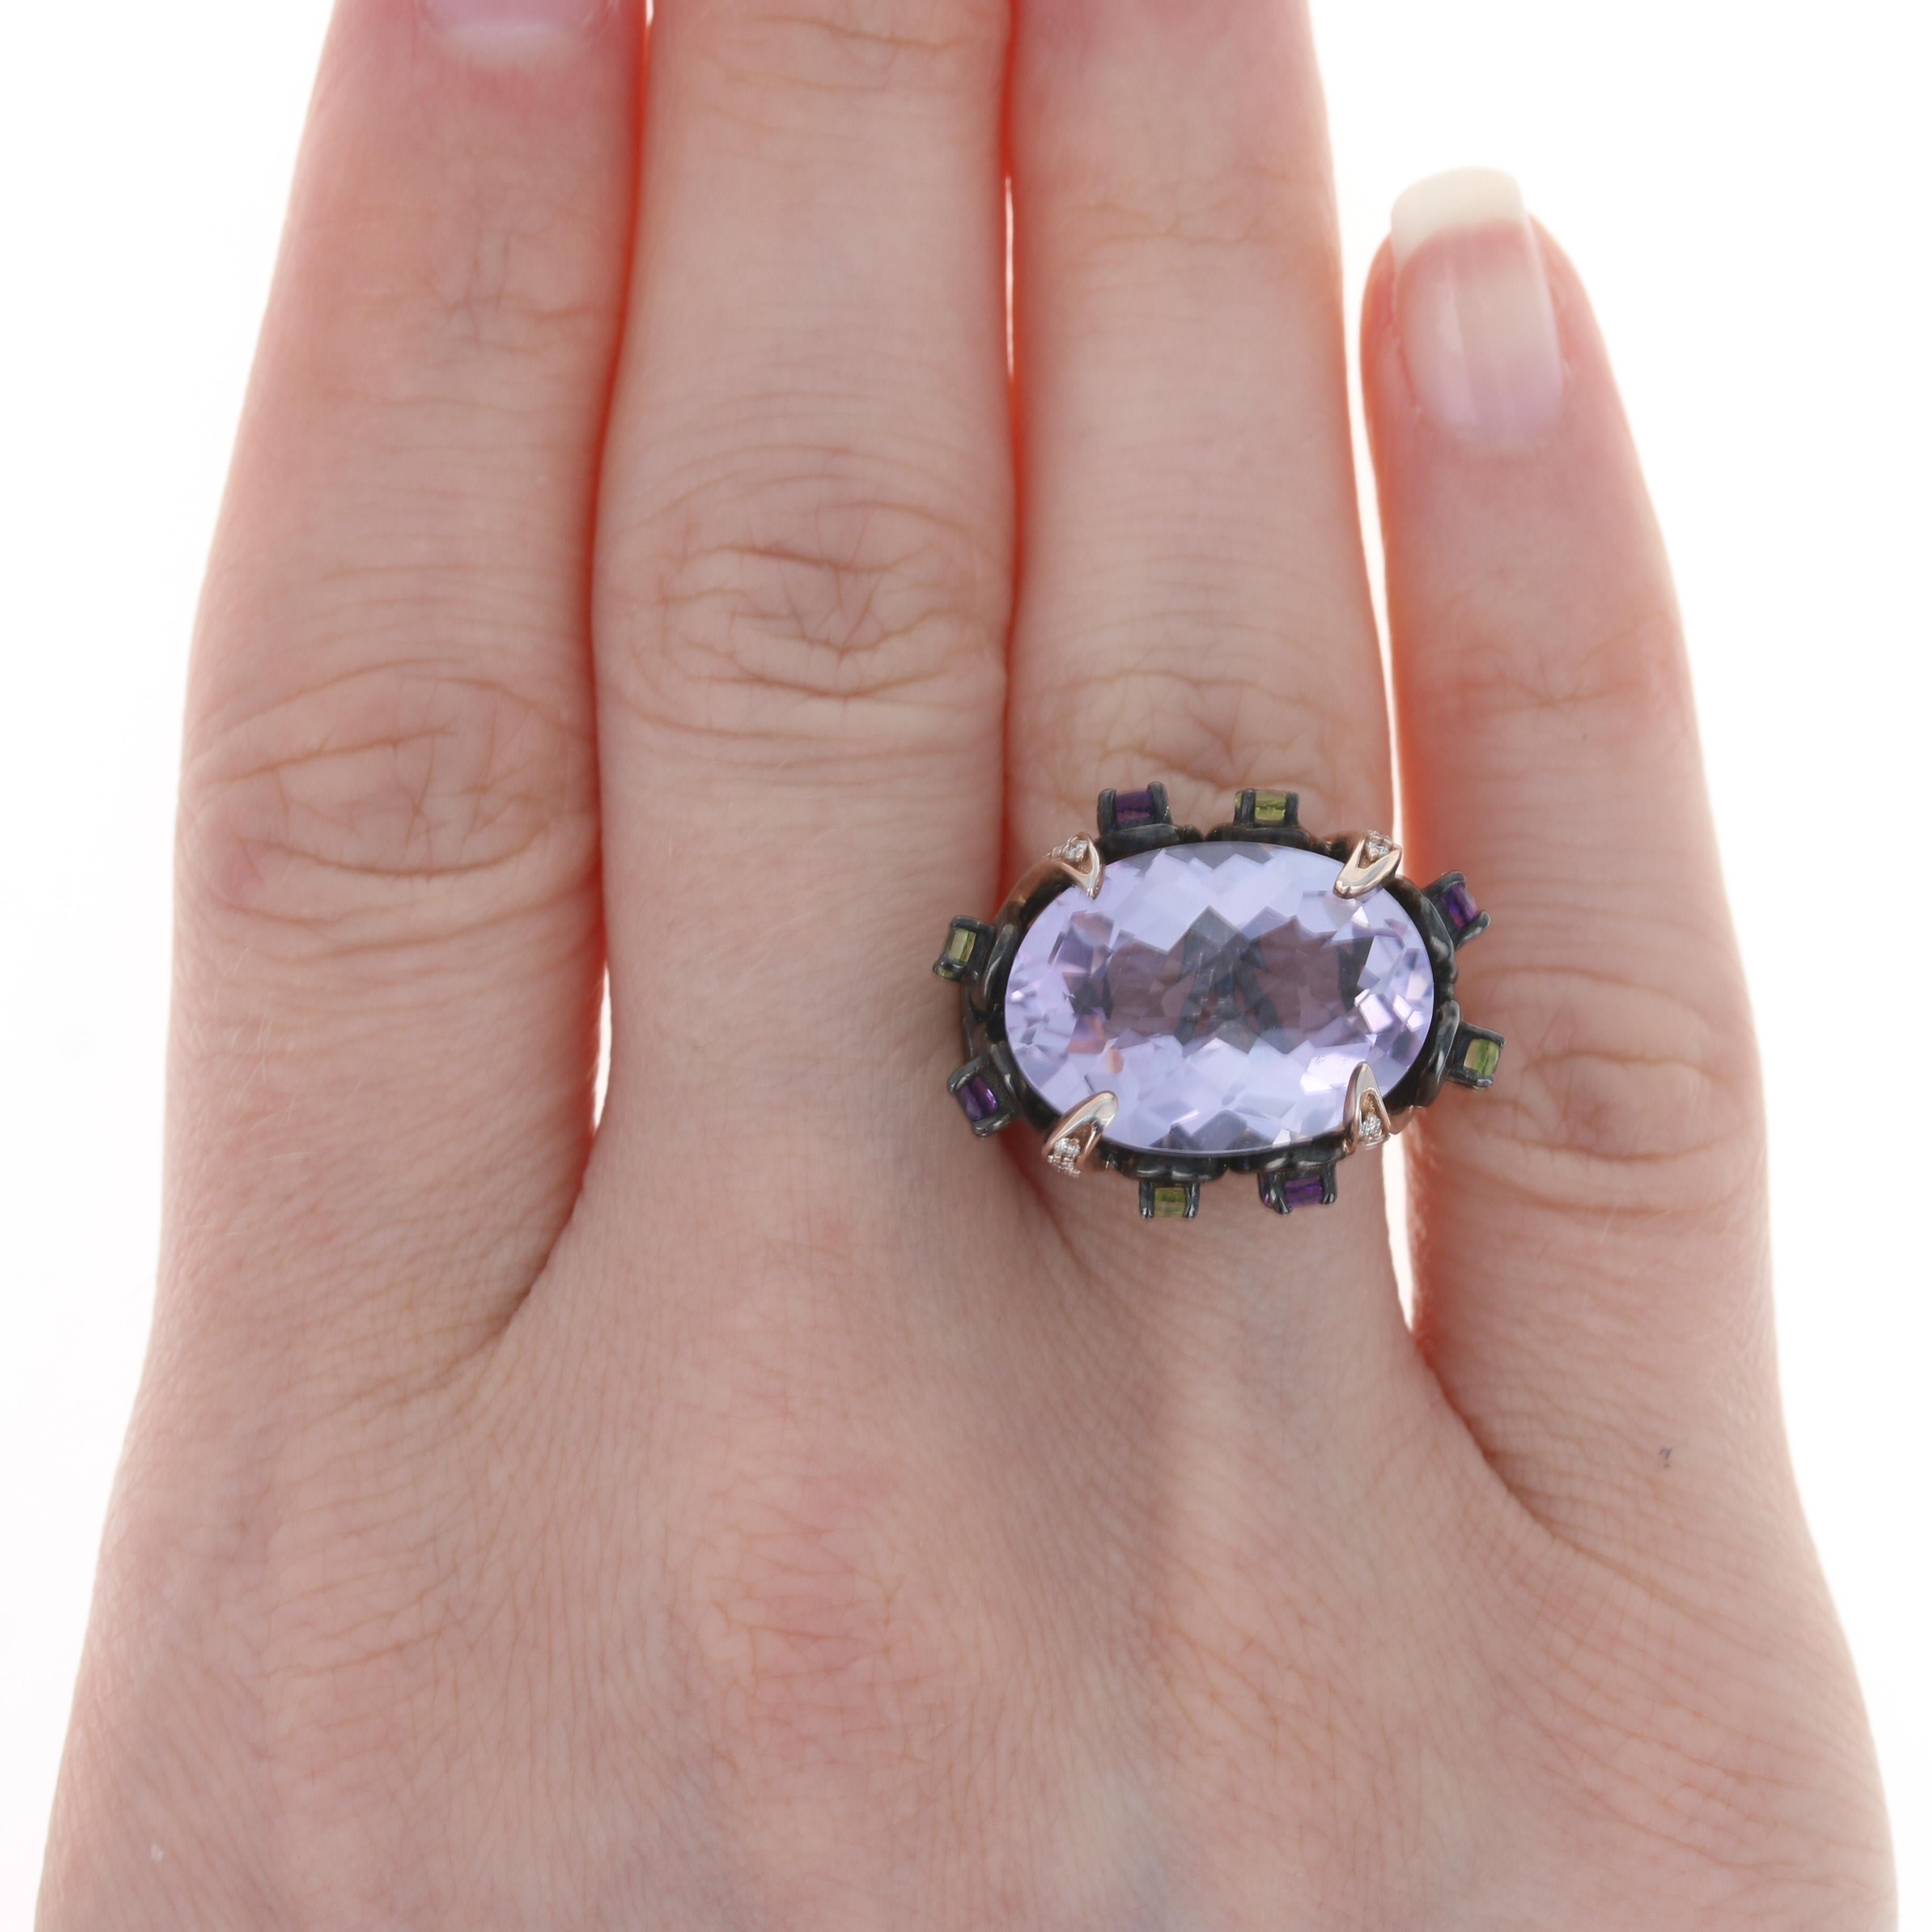 Size: 7 

Brand: Le Vian

Metal Content: Sterling Silver & 18k Rose Gold

Stone Information: 
Genuine Rose de France Amethyst
Carat: 8.50ct
Cut: Oval Checkerboard 
Color: Purple   
Size: 18mm x 13mm

Genuine Amethysts 
Carats: .40ctw
Cut: Round